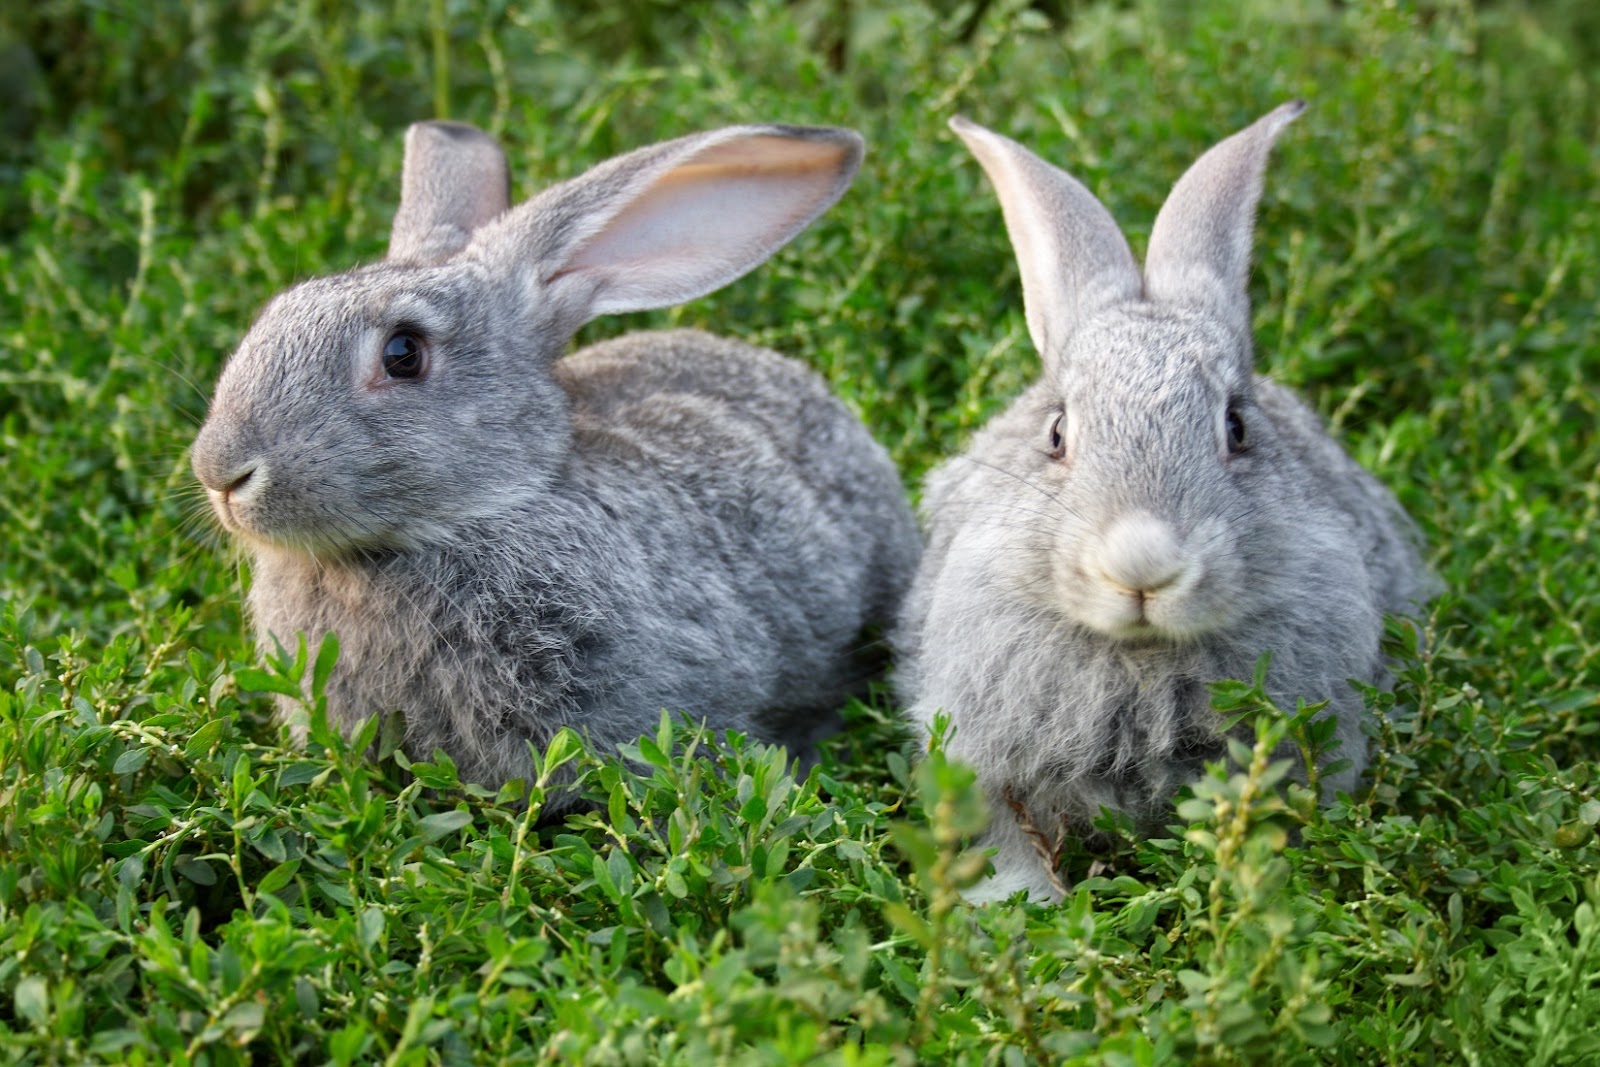 Can Rabbits Eat Nuts: nuts are not safe for rabbits to eat